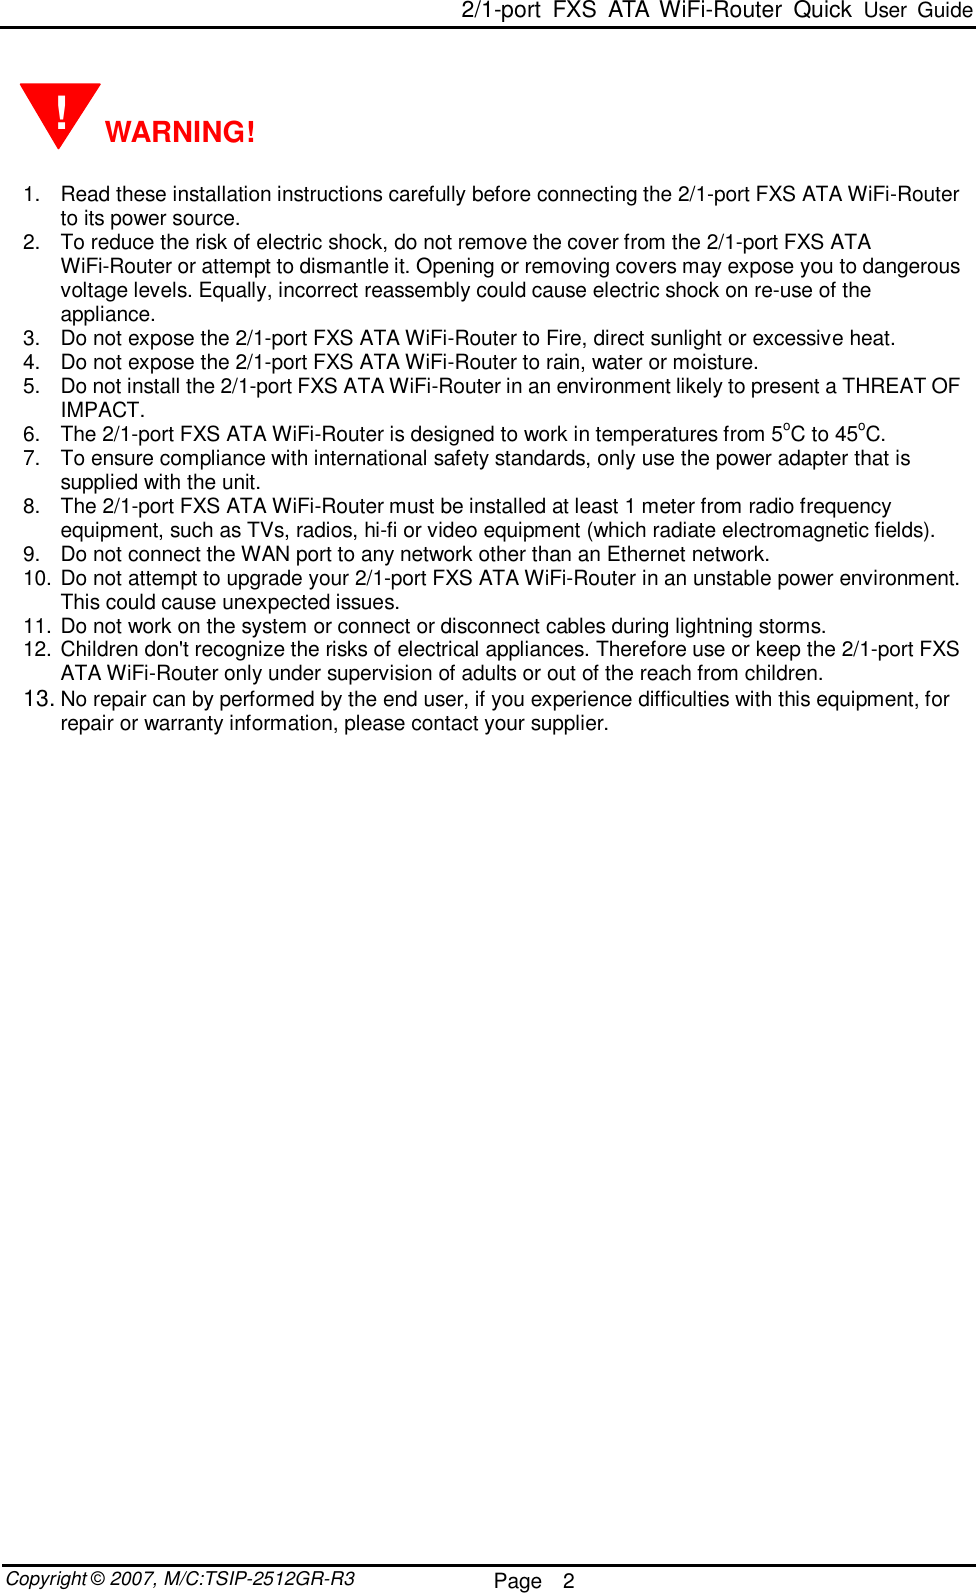  2/1-port FXS ATA WiFi-Router Quick User Guide  Copyright © 2007, M/C:TSIP-2512GR-R3  Page  2       WARNING!  1. Read these installation instructions carefully before connecting the 2/1-port FXS ATA WiFi-Router to its power source. 2. To reduce the risk of electric shock, do not remove the cover from the 2/1-port FXS ATA WiFi-Router or attempt to dismantle it. Opening or removing covers may expose you to dangerous voltage levels. Equally, incorrect reassembly could cause electric shock on re-use of the appliance. 3. Do not expose the 2/1-port FXS ATA WiFi-Router to Fire, direct sunlight or excessive heat. 4. Do not expose the 2/1-port FXS ATA WiFi-Router to rain, water or moisture. 5. Do not install the 2/1-port FXS ATA WiFi-Router in an environment likely to present a THREAT OF IMPACT. 6. The 2/1-port FXS ATA WiFi-Router is designed to work in temperatures from 5oC to 45oC. 7. To ensure compliance with international safety standards, only use the power adapter that is supplied with the unit. 8. The 2/1-port FXS ATA WiFi-Router must be installed at least 1 meter from radio frequency equipment, such as TVs, radios, hi-fi or video equipment (which radiate electromagnetic fields). 9. Do not connect the WAN port to any network other than an Ethernet network. 10. Do not attempt to upgrade your 2/1-port FXS ATA WiFi-Router in an unstable power environment. This could cause unexpected issues. 11. Do not work on the system or connect or disconnect cables during lightning storms. 12. Children don&apos;t recognize the risks of electrical appliances. Therefore use or keep the 2/1-port FXS ATA WiFi-Router only under supervision of adults or out of the reach from children. 13. No repair can by performed by the end user, if you experience difficulties with this equipment, for repair or warranty information, please contact your supplier.   ! 